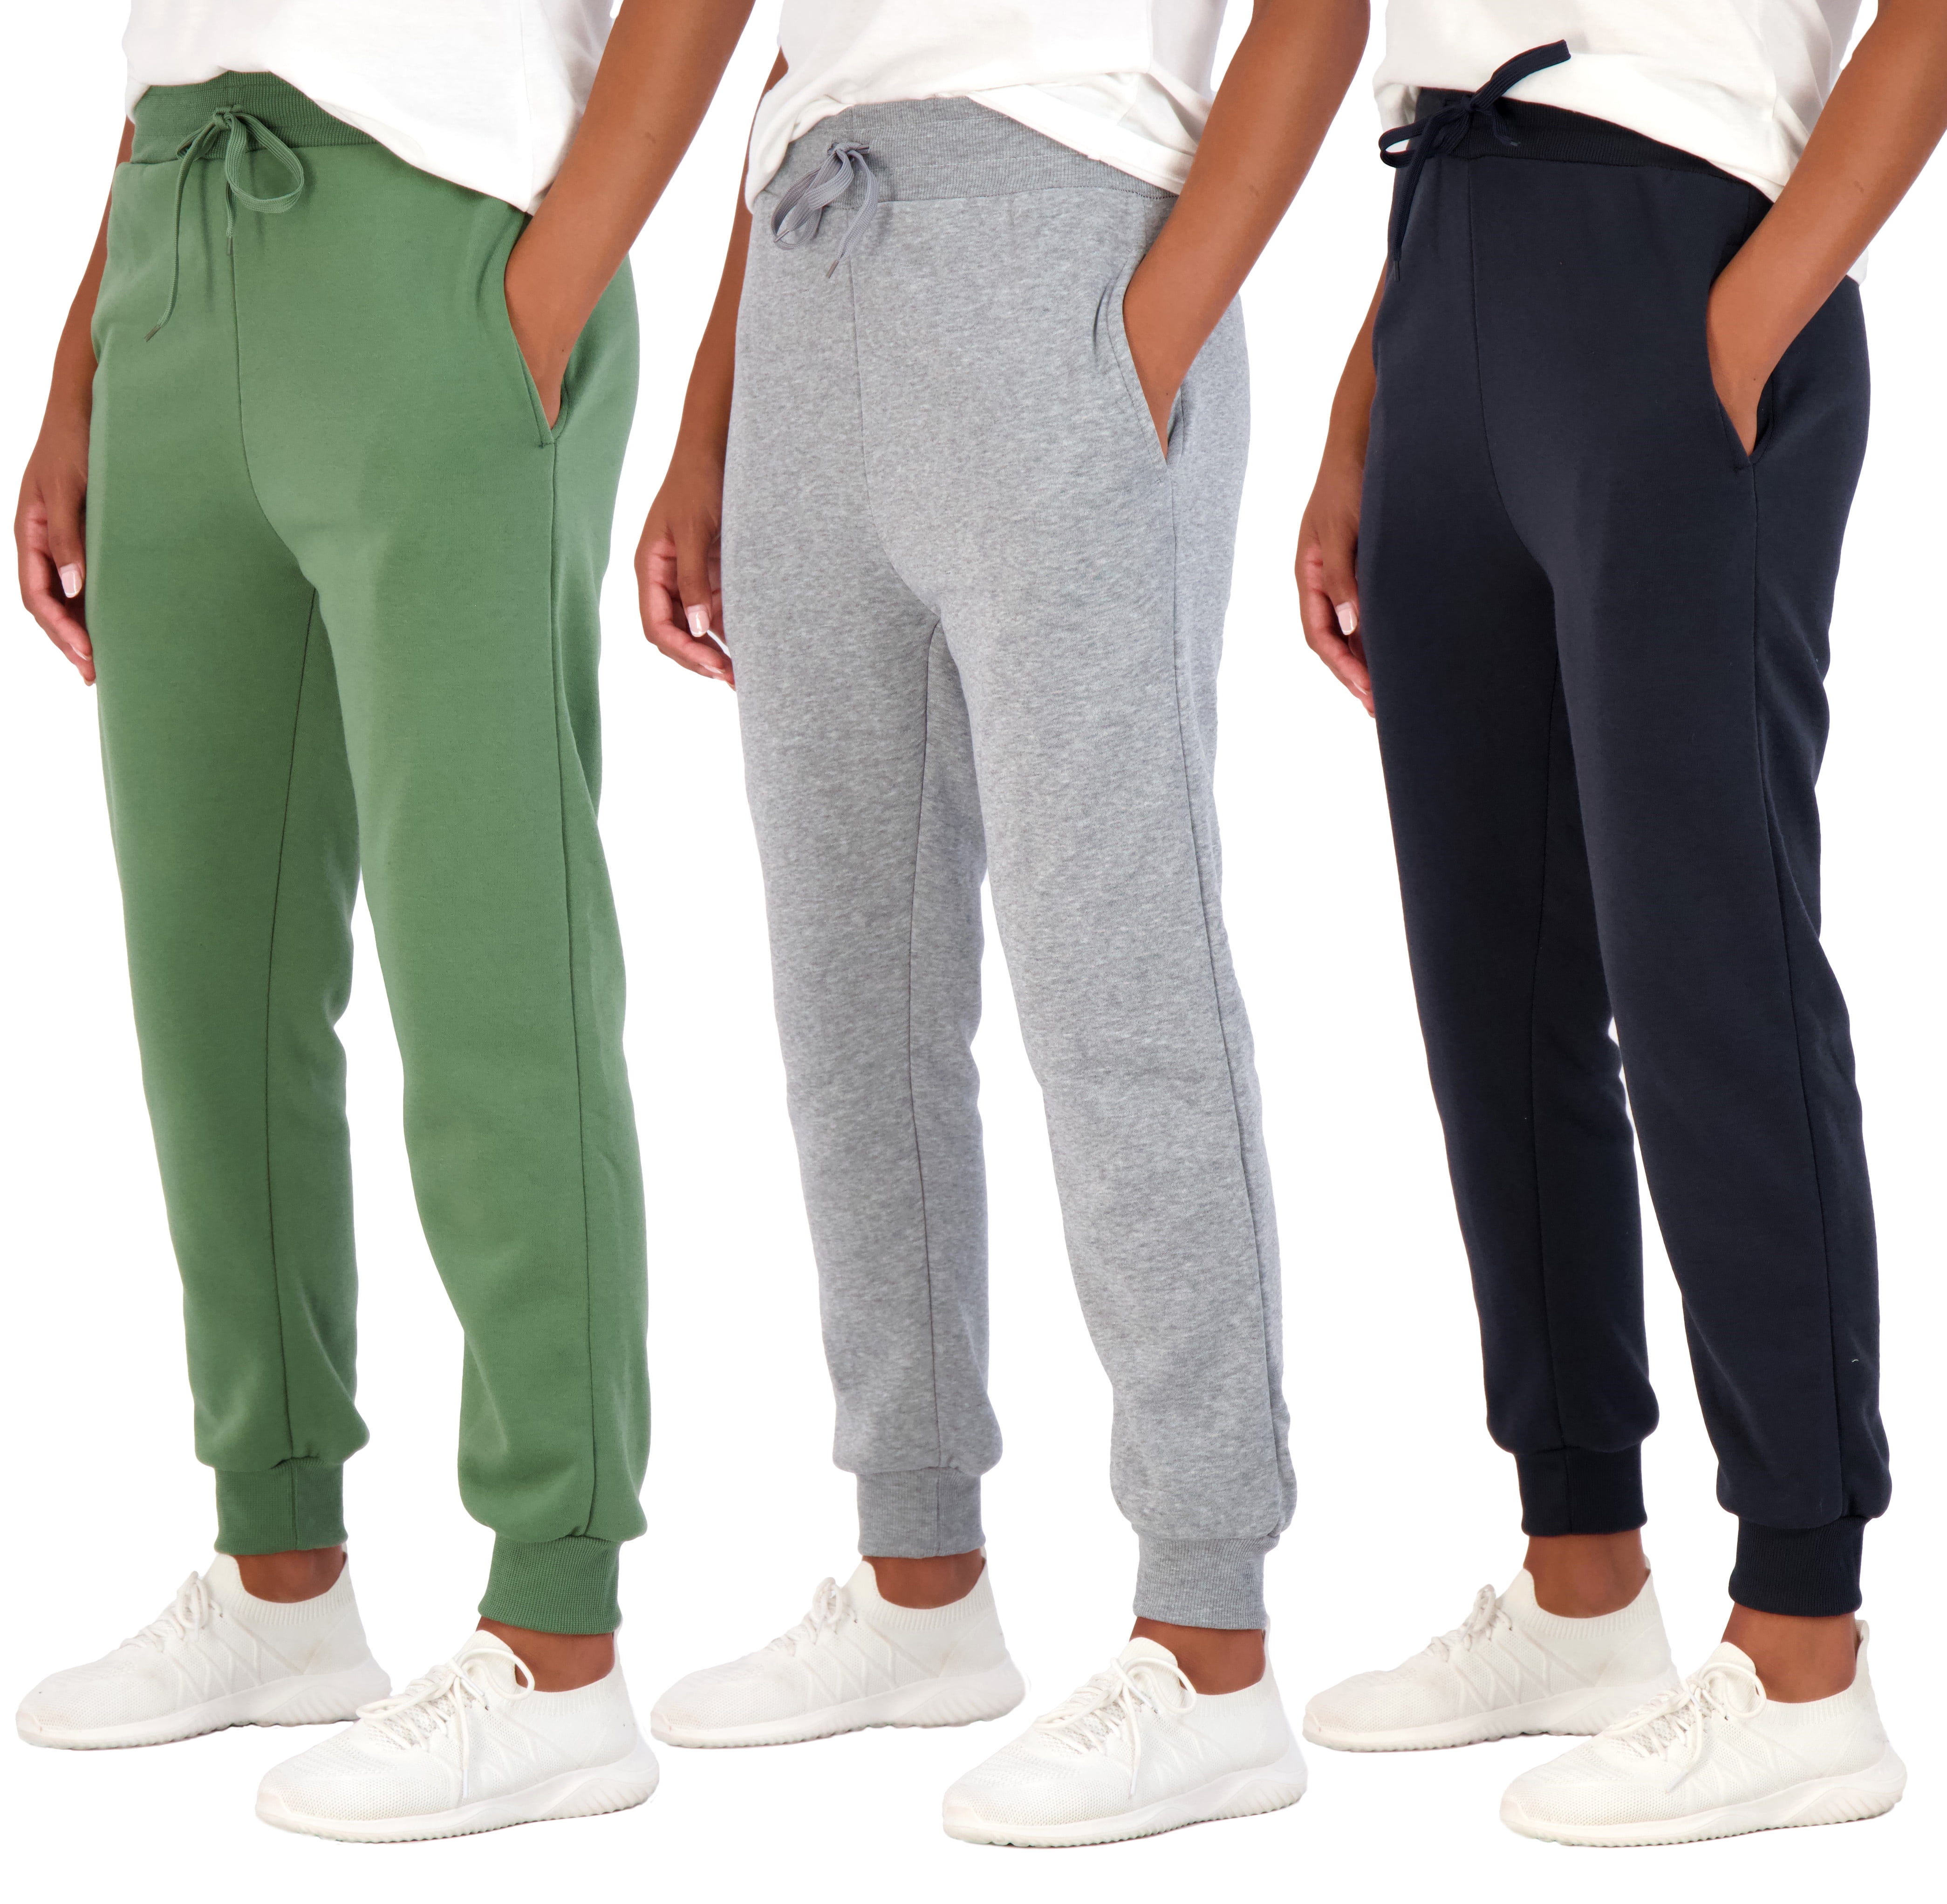 Real Essentials 3 Pack: Women's Relaxed Fit Fleece Jogger Sweatpants ...